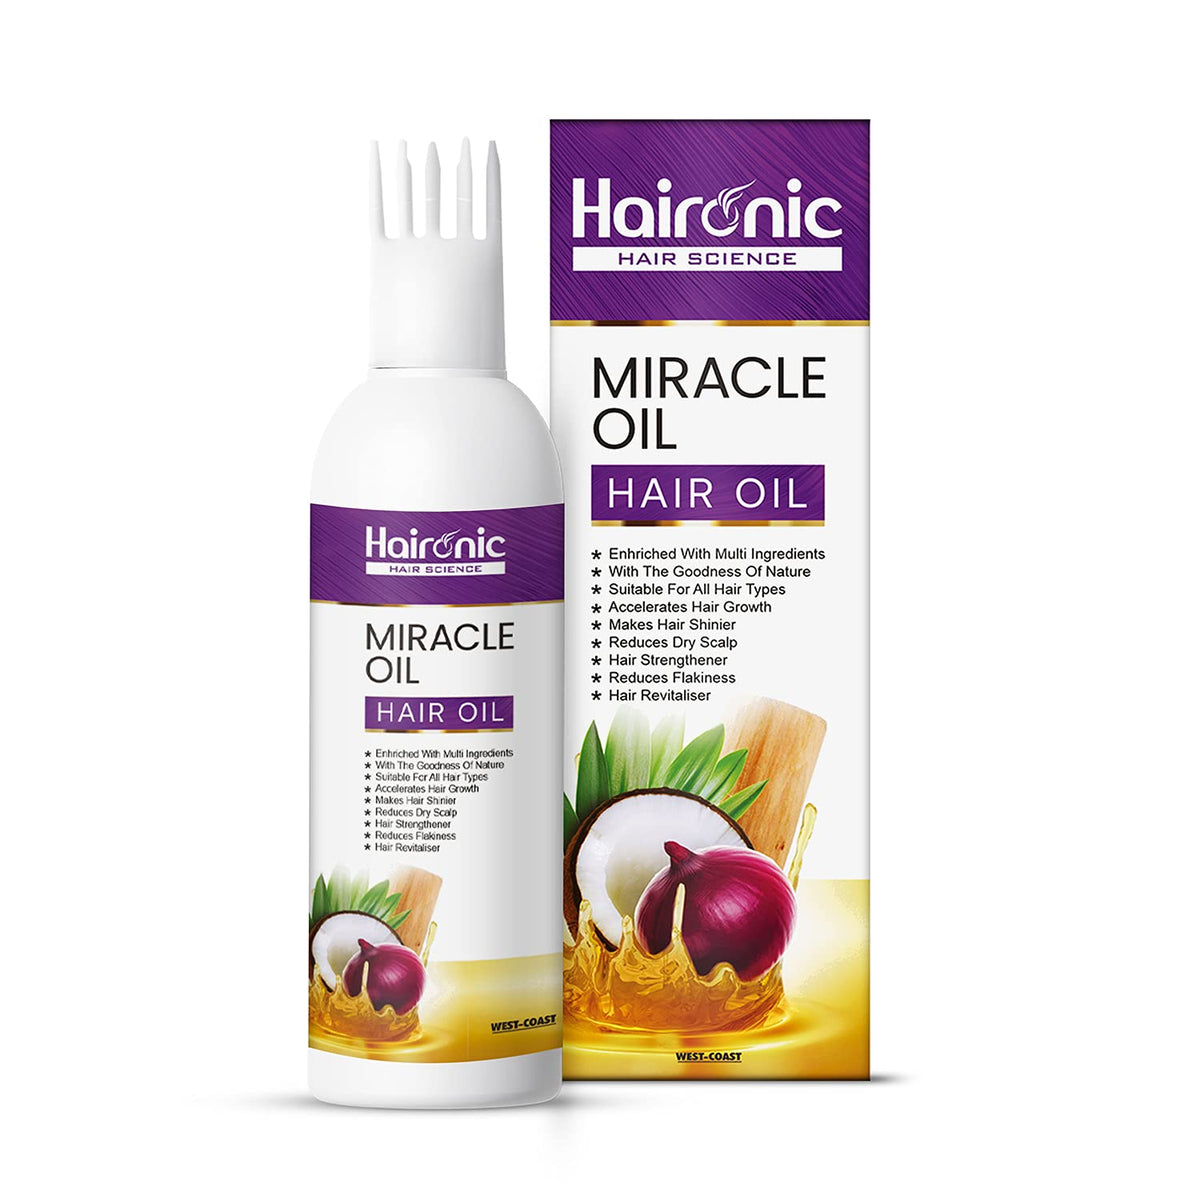 Haironic Hair Science Miracle Hair Oil Enriched With Multi Ingredients for Anti-Hair Fall Control with Organic Onion and Sesame Seeds Oil -100ml (Pack of 3)